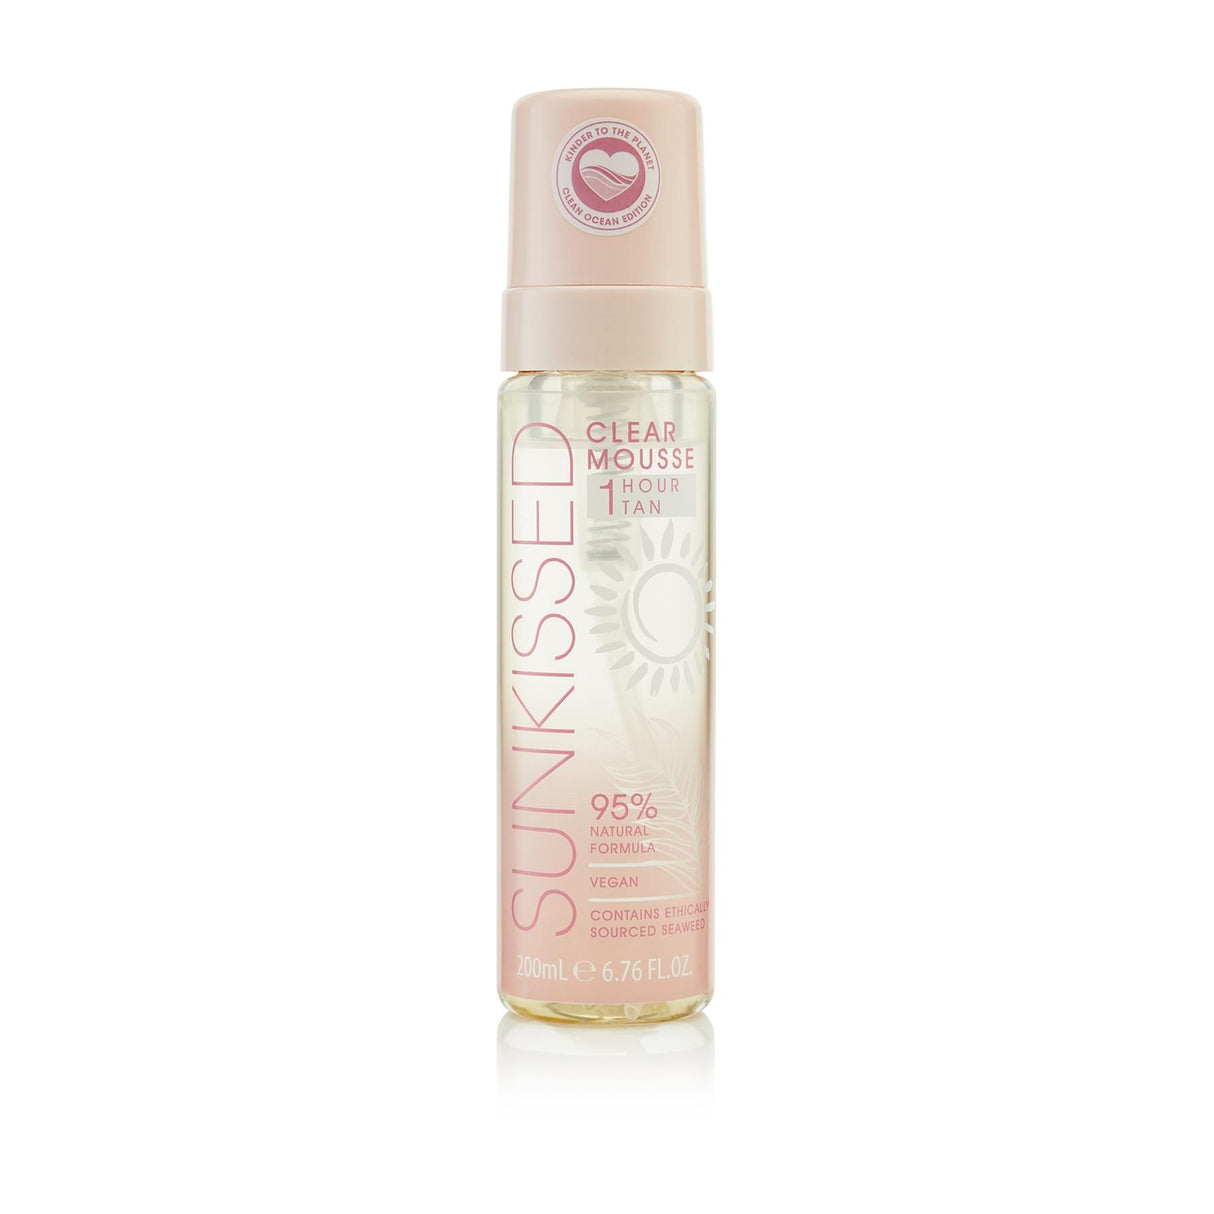 Sunkissed Clear Mousse 1 Hour Tan 200ml Clean Ocean Edition